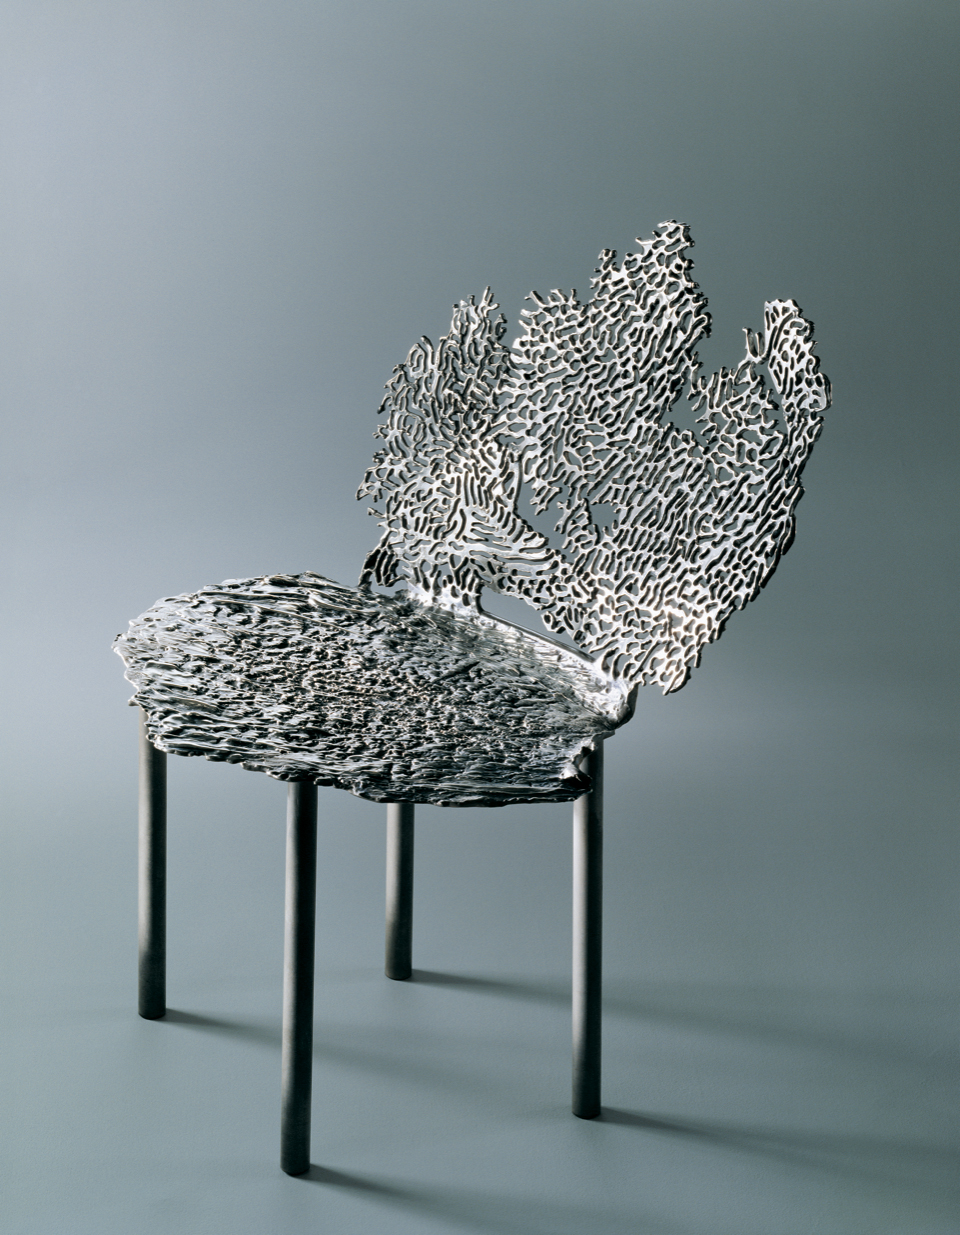 Michele Oka Doner, Coral Wave chair, 1990, Los Angeles County Museum of Art, partial gift of the artist, purchased with funds provided by Bruce Newman through the 2019 Decorative Arts and Design Acquisitions Committee (DA²), photo courtesy of the artist